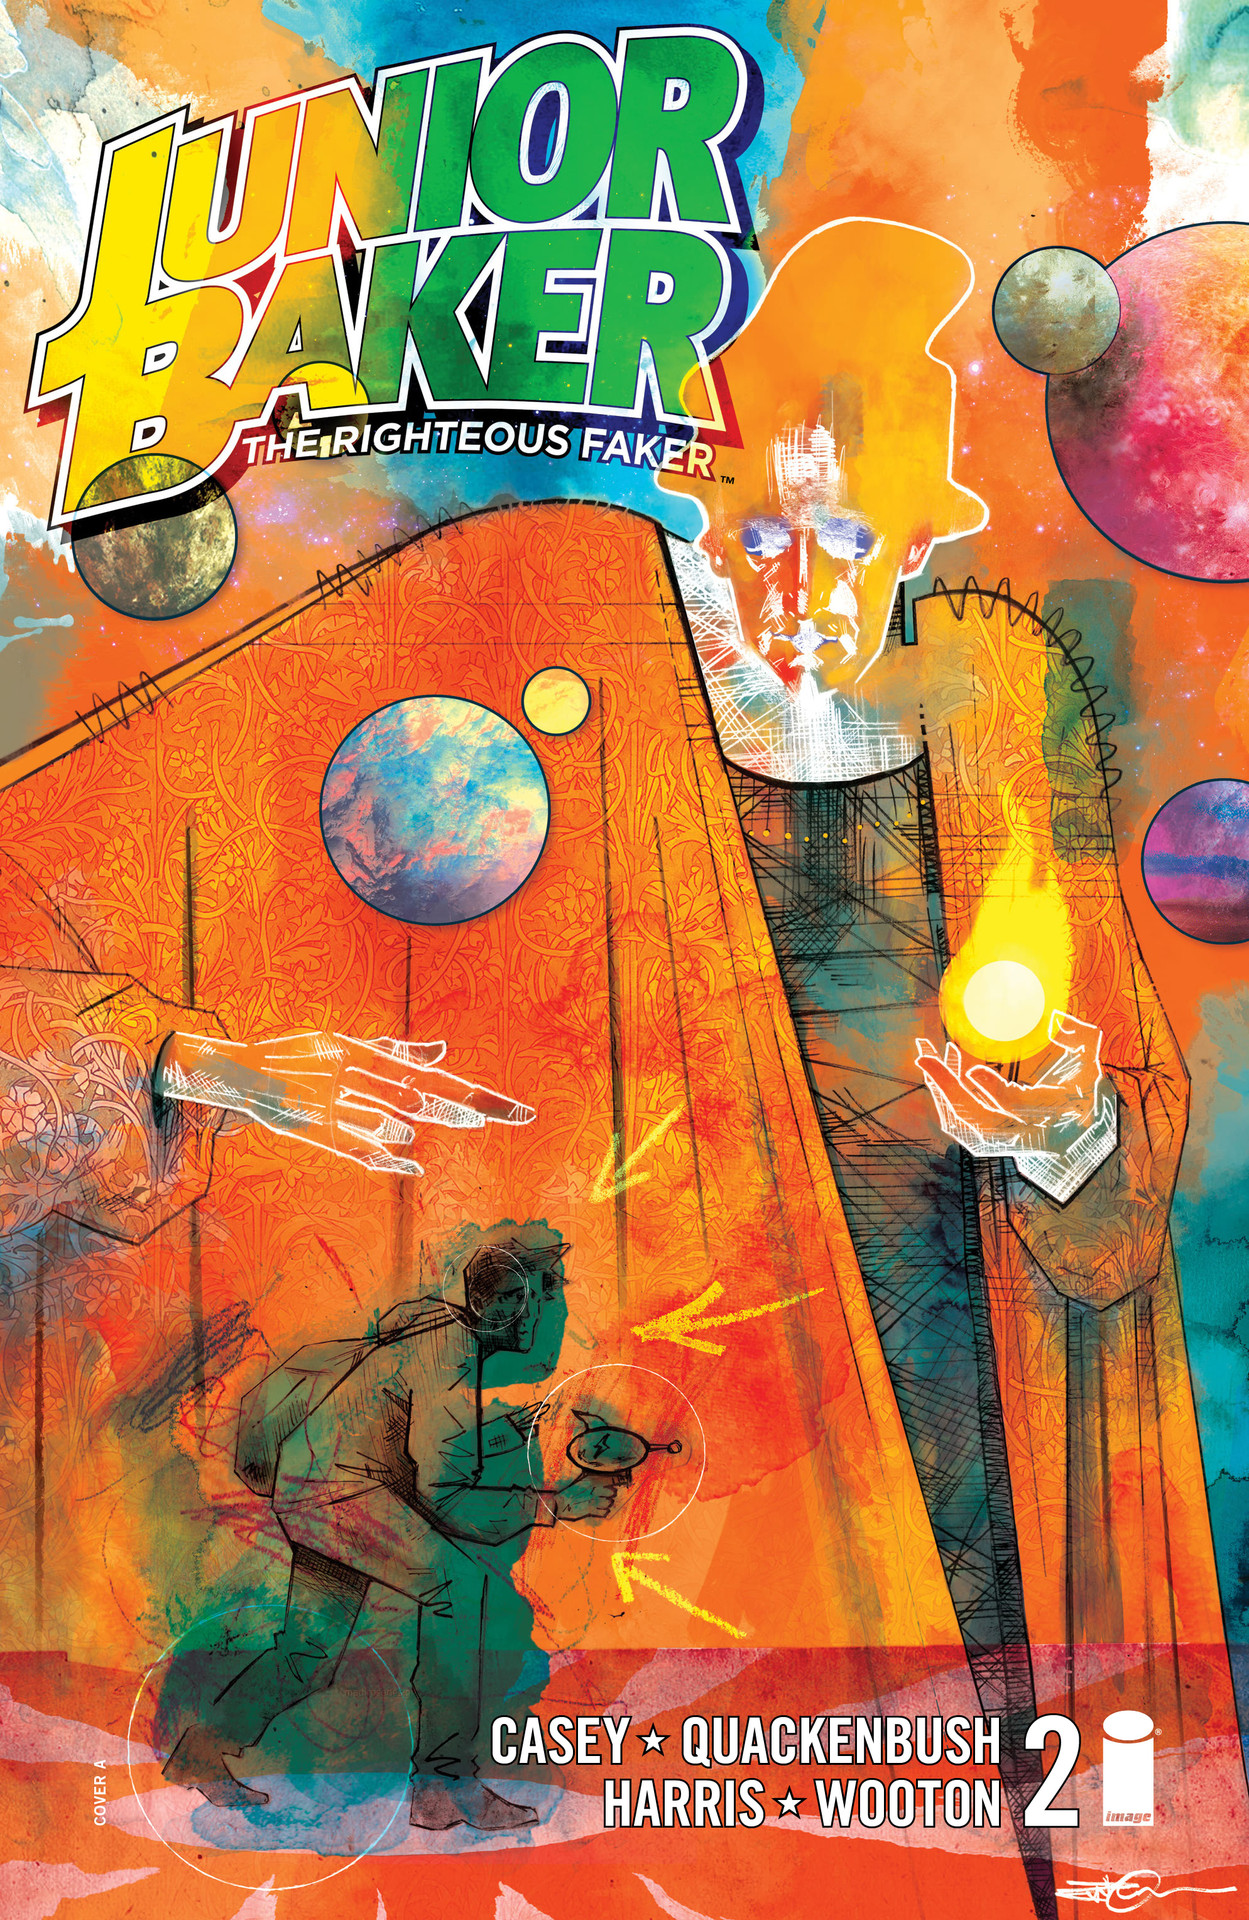 Read online Junior Baker the Righteous Faker comic -  Issue #2 - 1